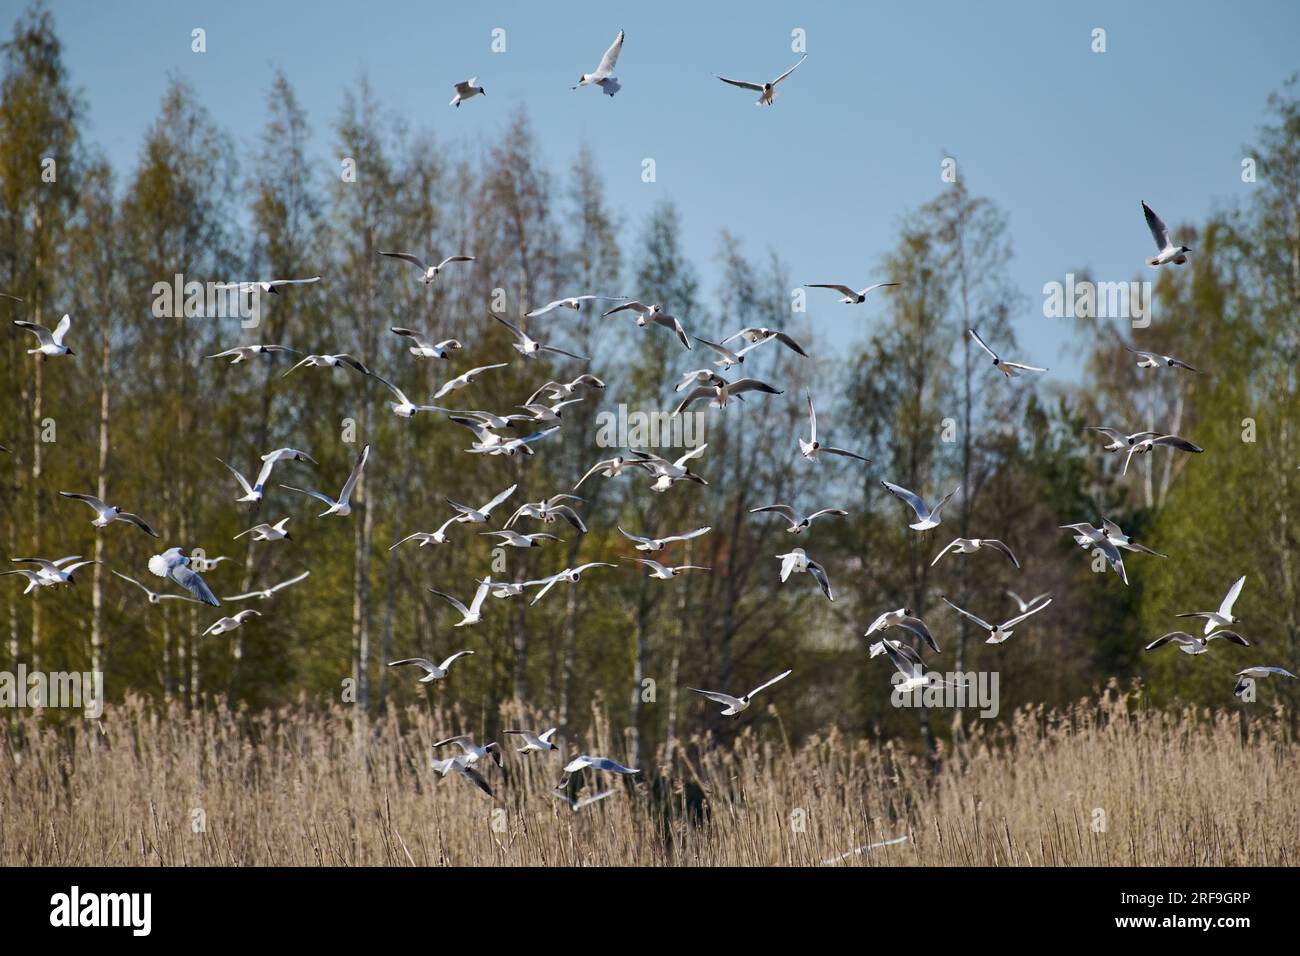 Flock of seagulls flying over reeds in Espoo, Finland on sunny day in April 2019. Stock Photo